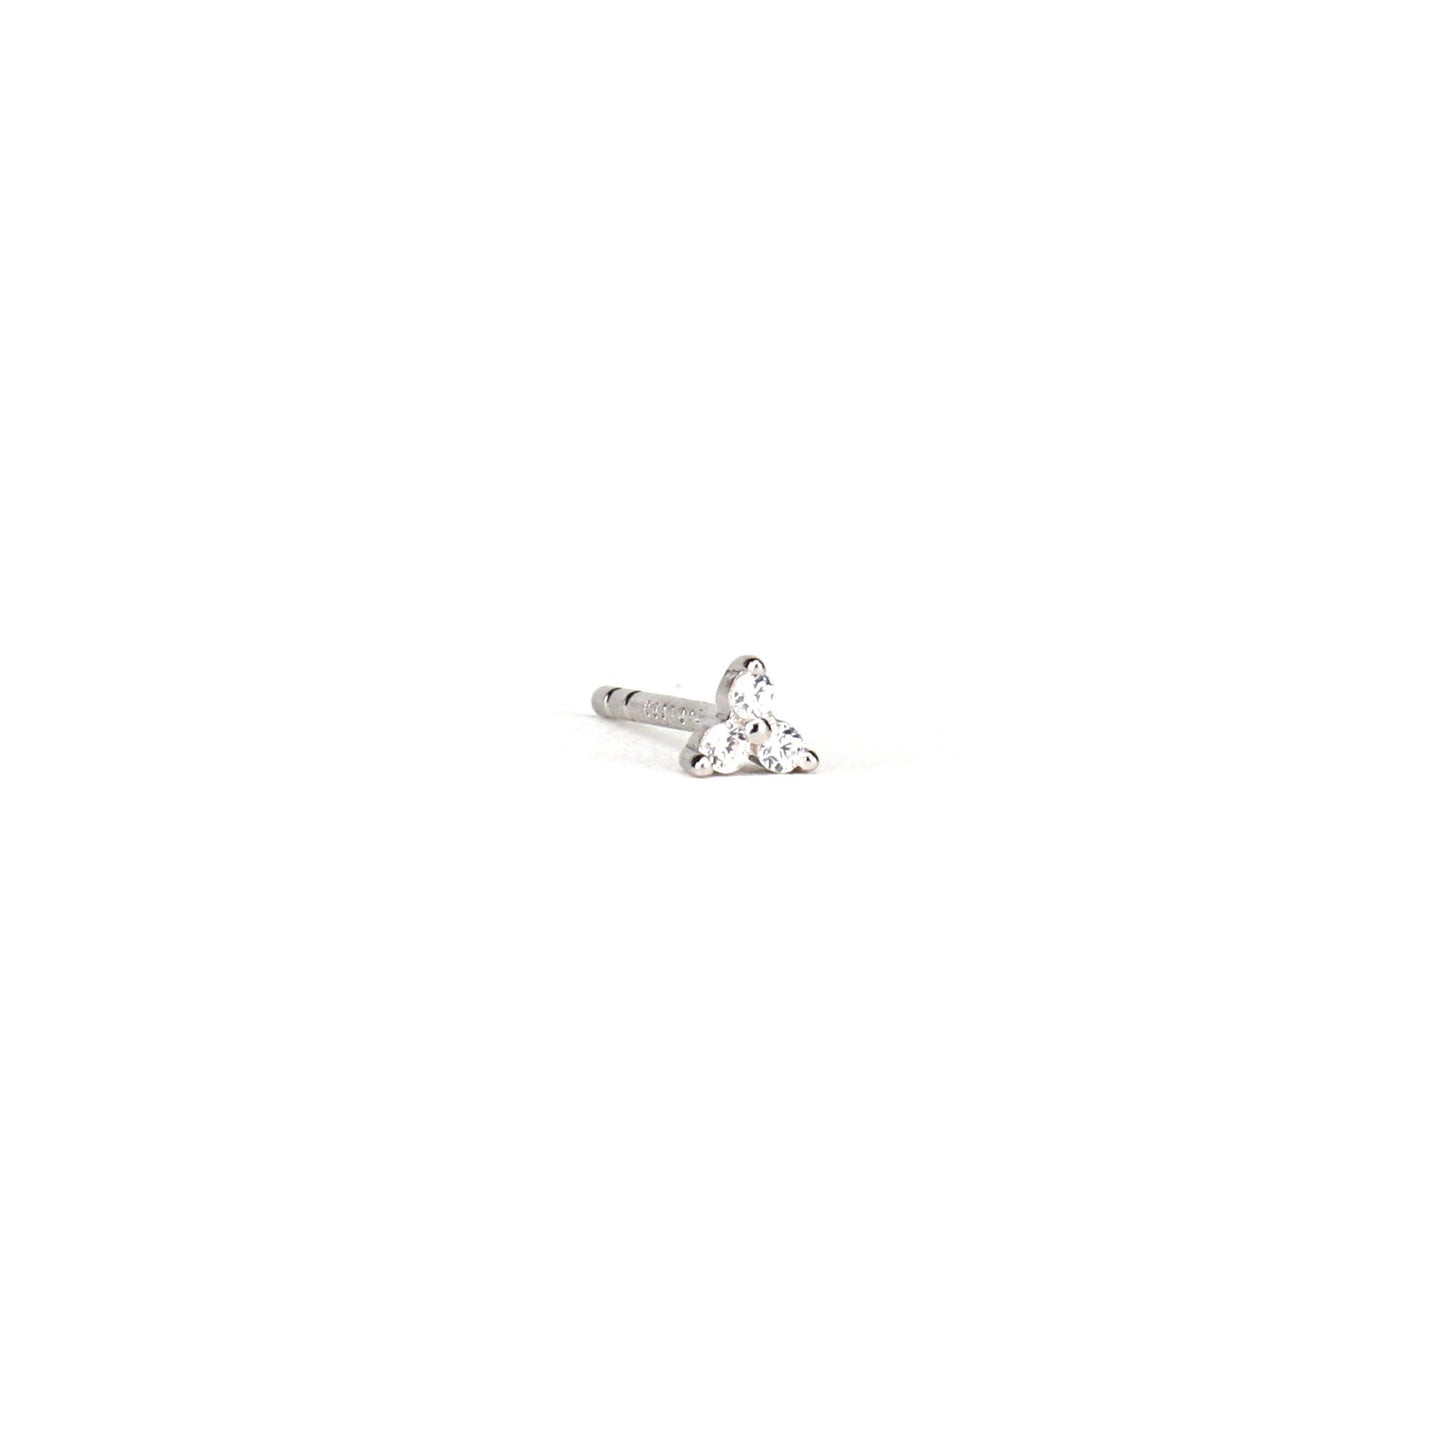 Aire ear stud - Silver